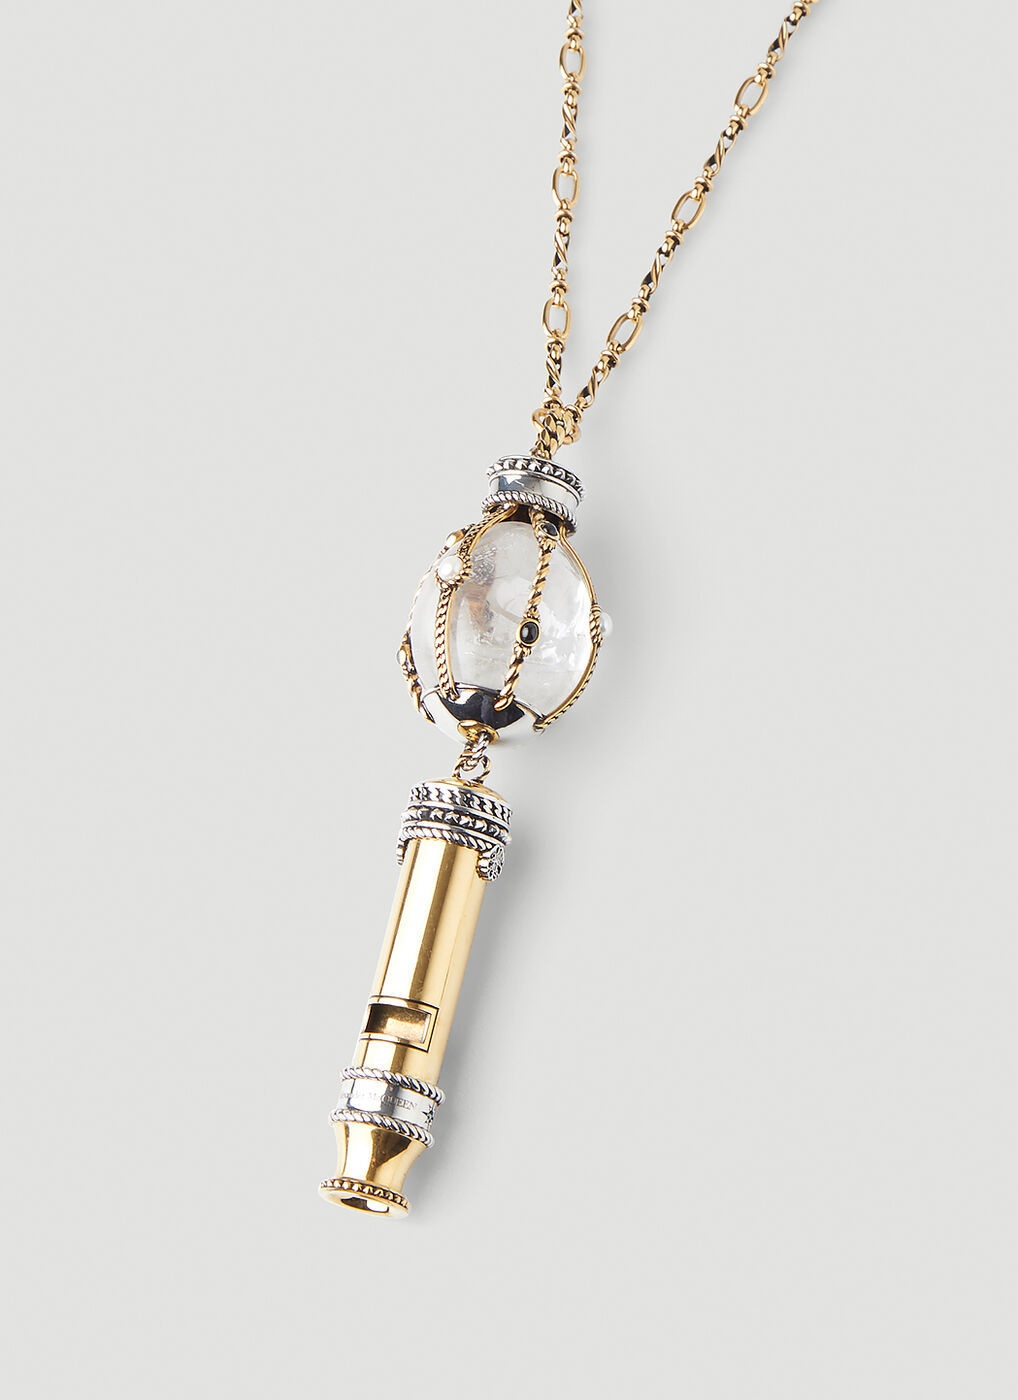 NECKLACE - CRYSTAL CC WHISTLE PENDANT